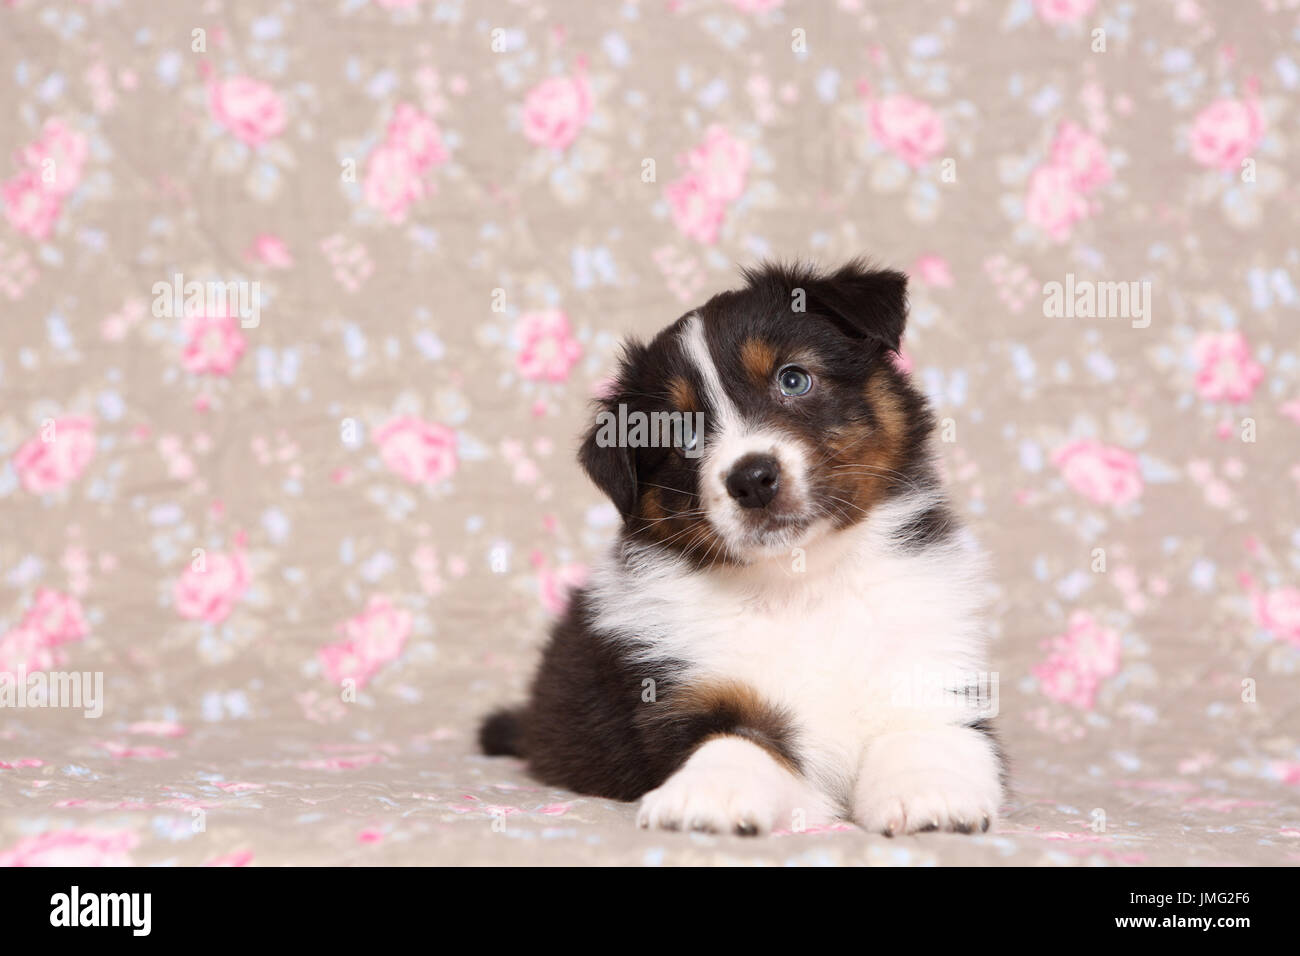 Australian Shepherd. Puppy (6 weeks old) lying. Studio picture seen against a floral design wallpaper. Germany Stock Photo